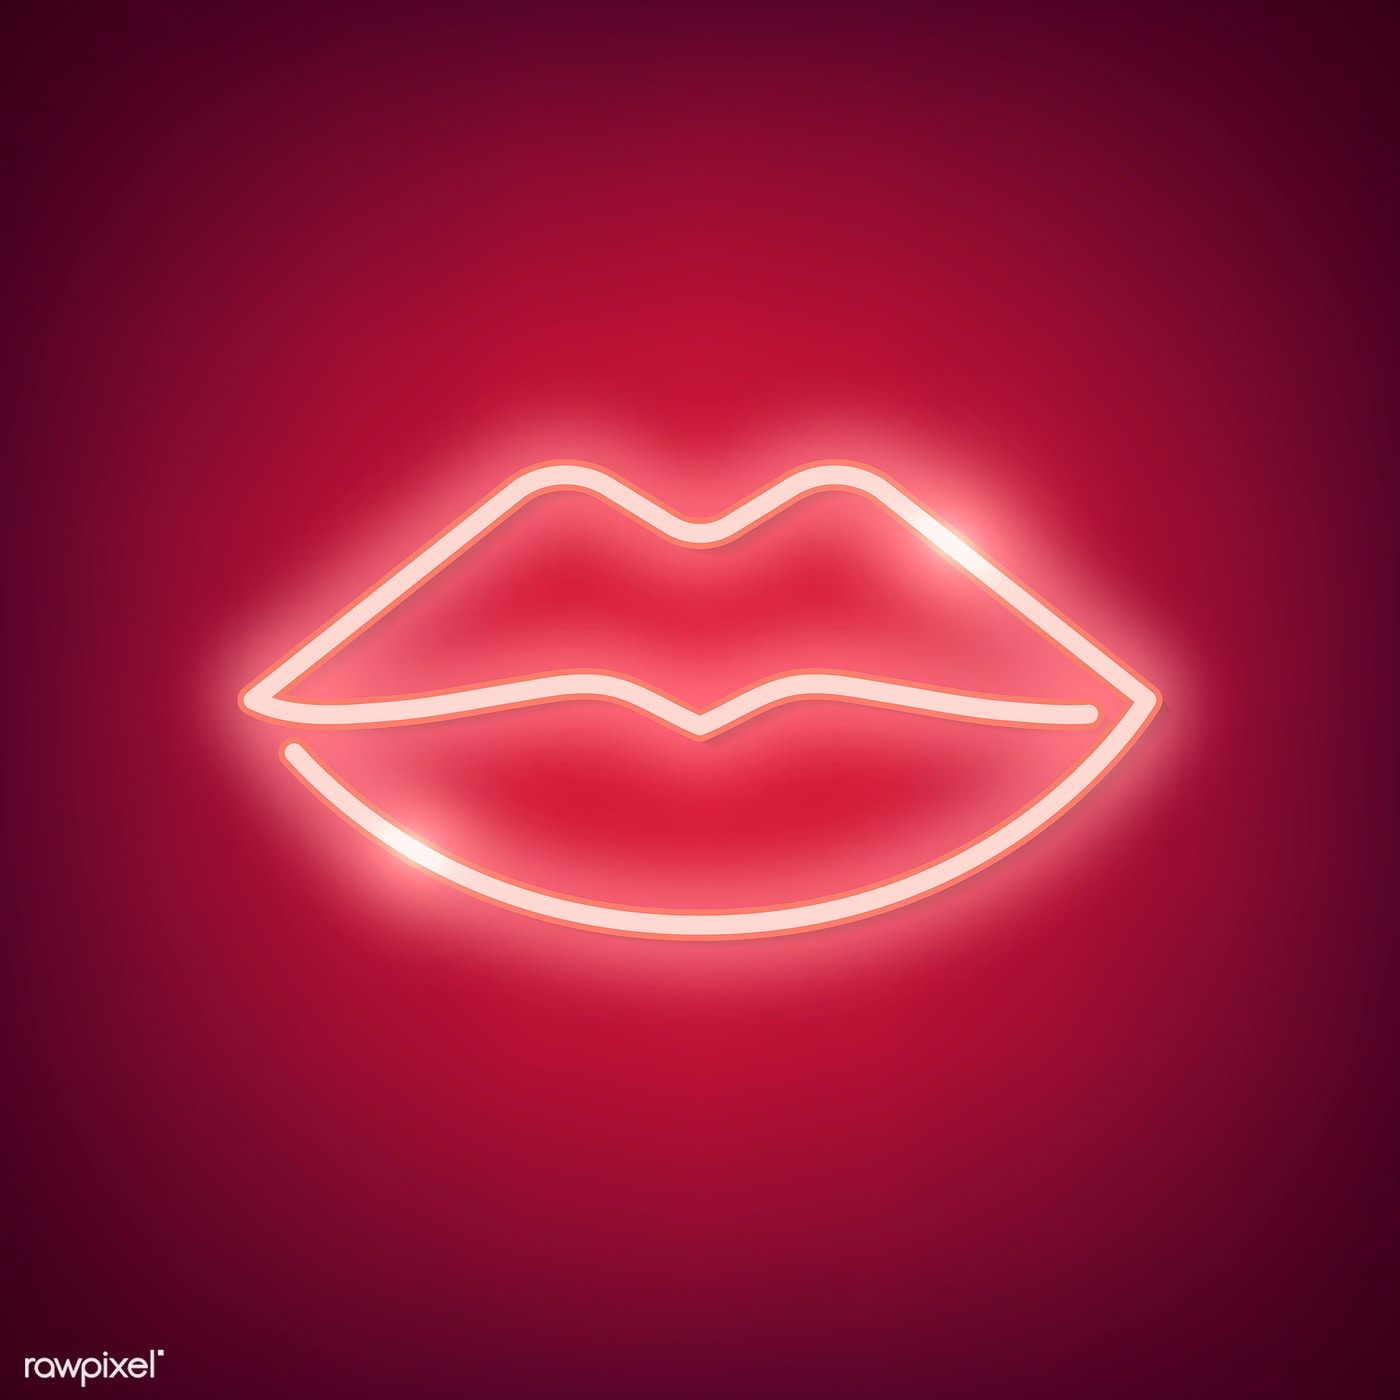 Neon light kiss sign on red background. free image / NingZk V. Red background, Vector free, Neon aesthetic